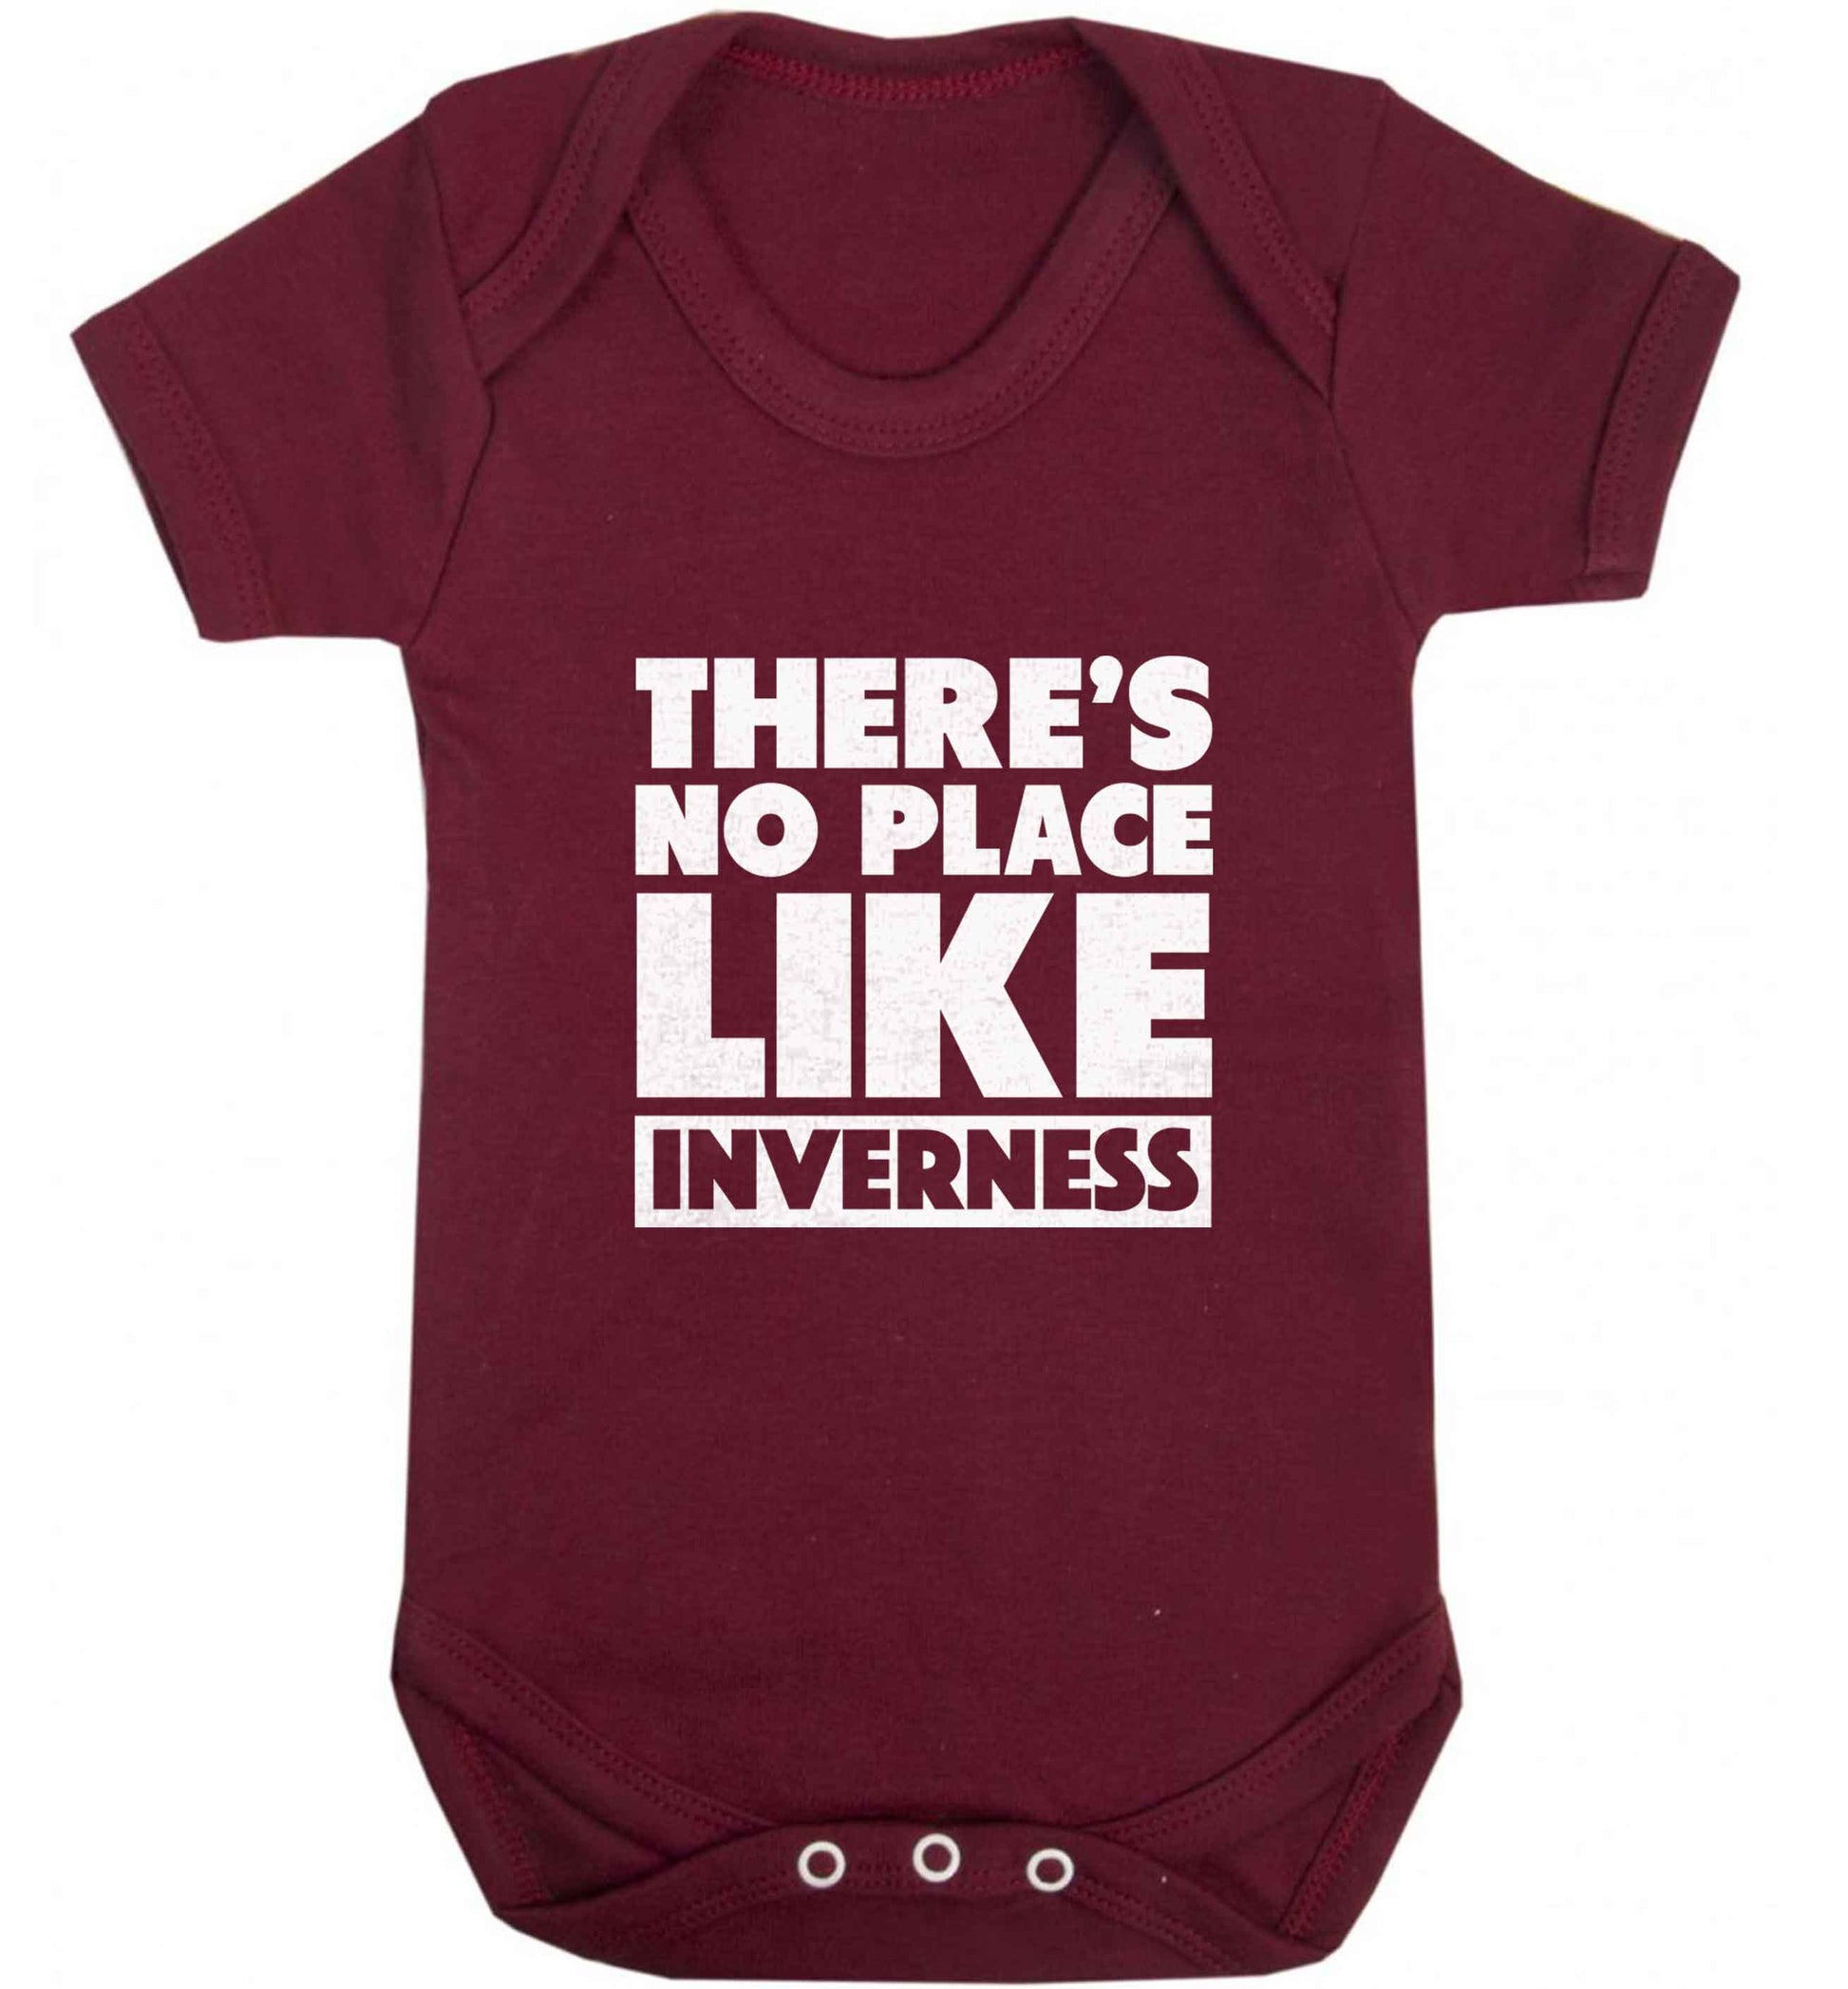 There's no place like Inverness baby vest maroon 18-24 months